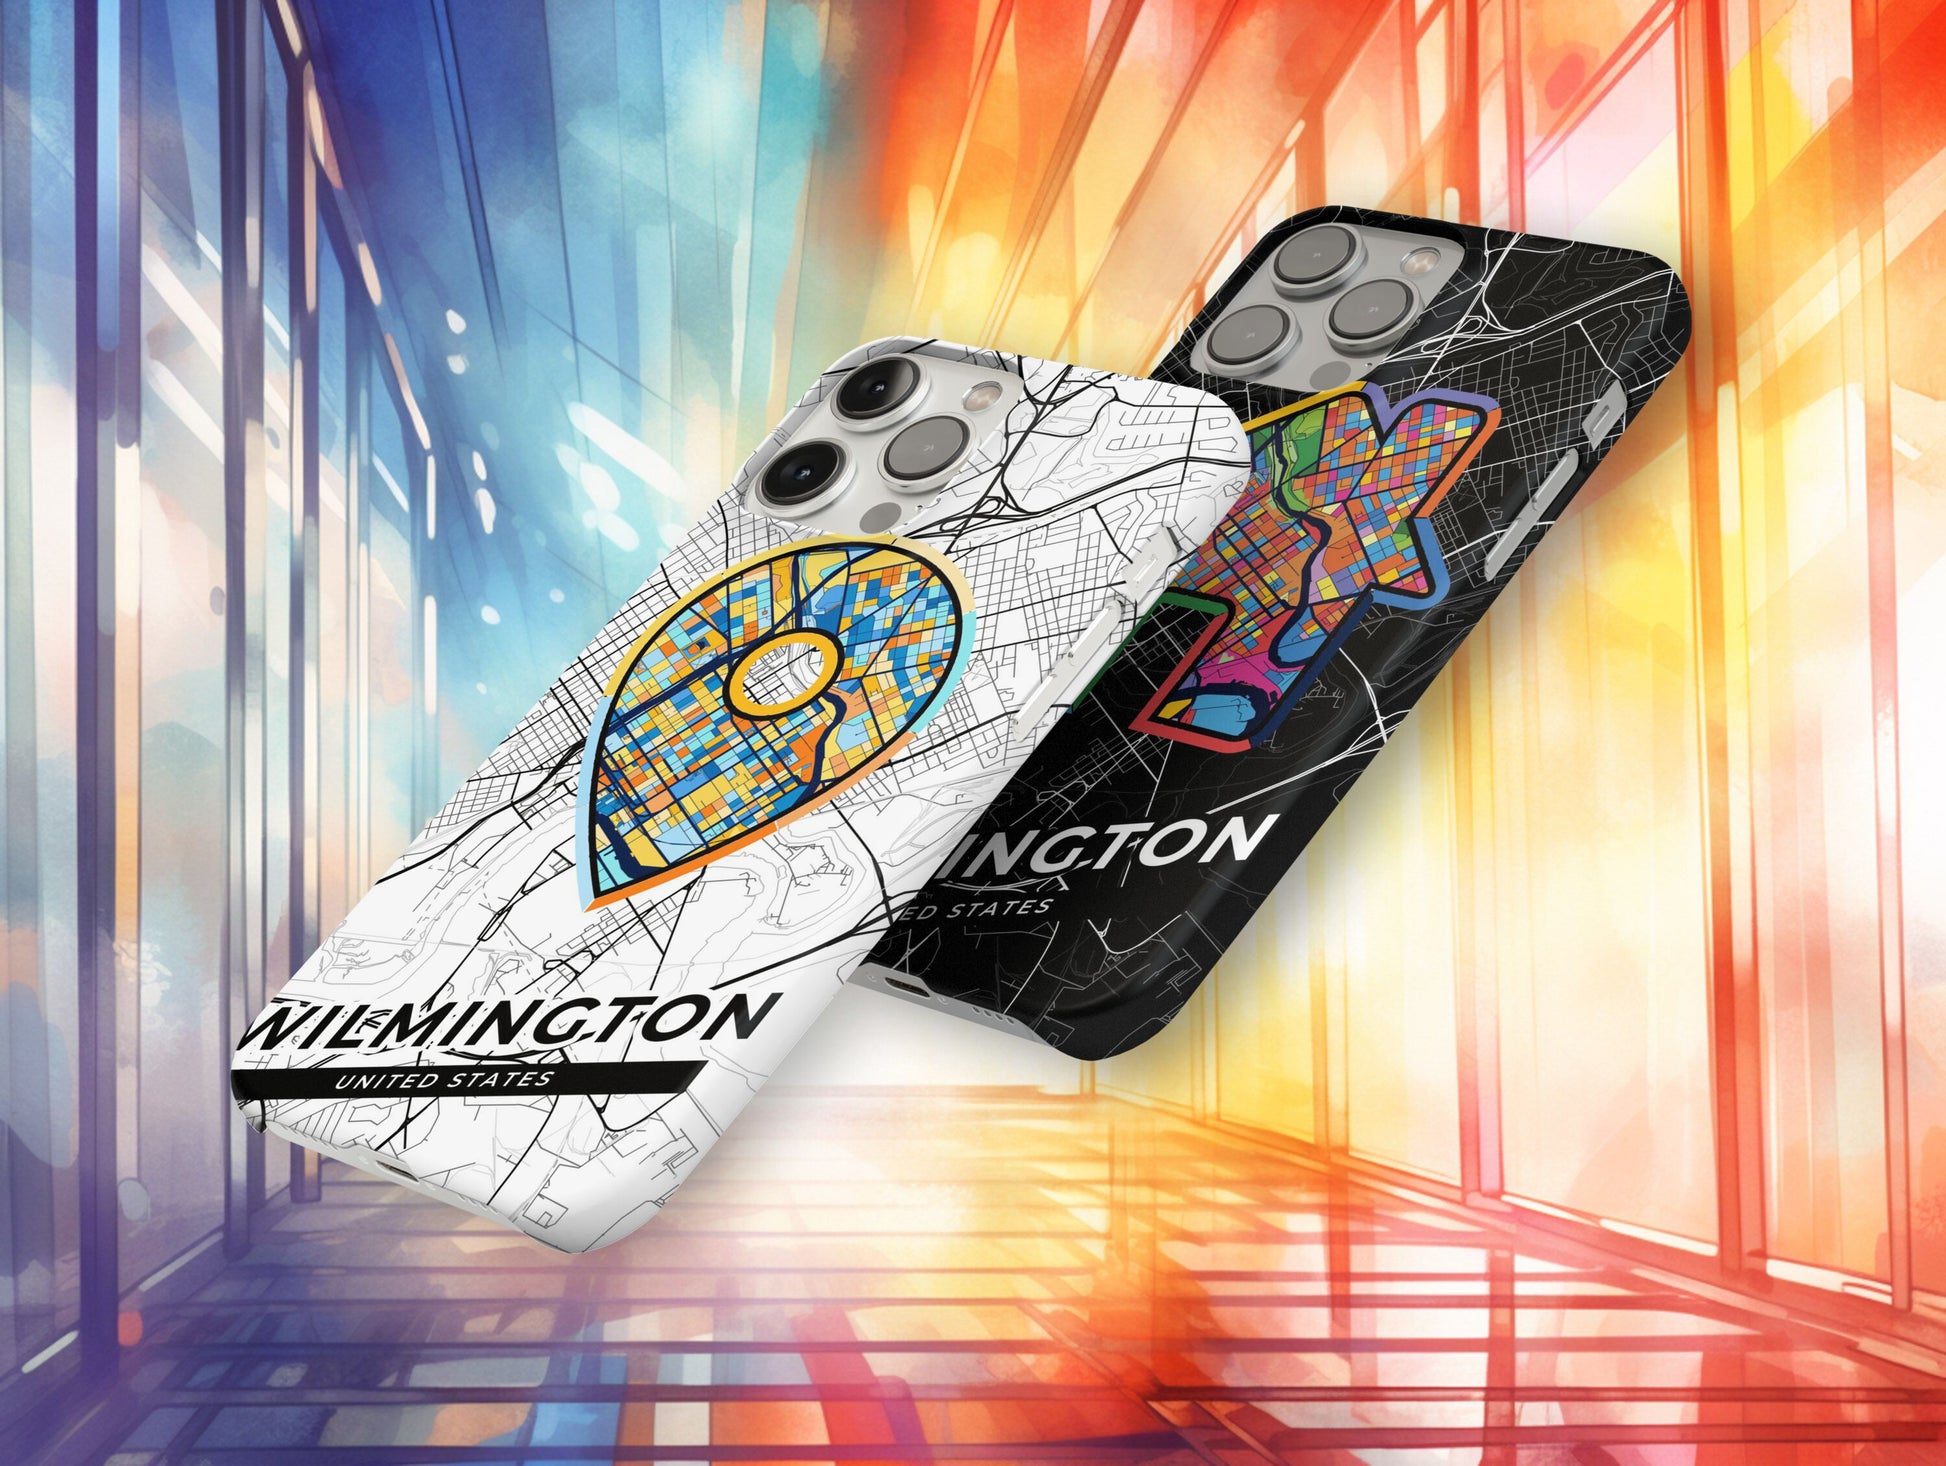 Wilmington Delaware slim phone case with colorful icon